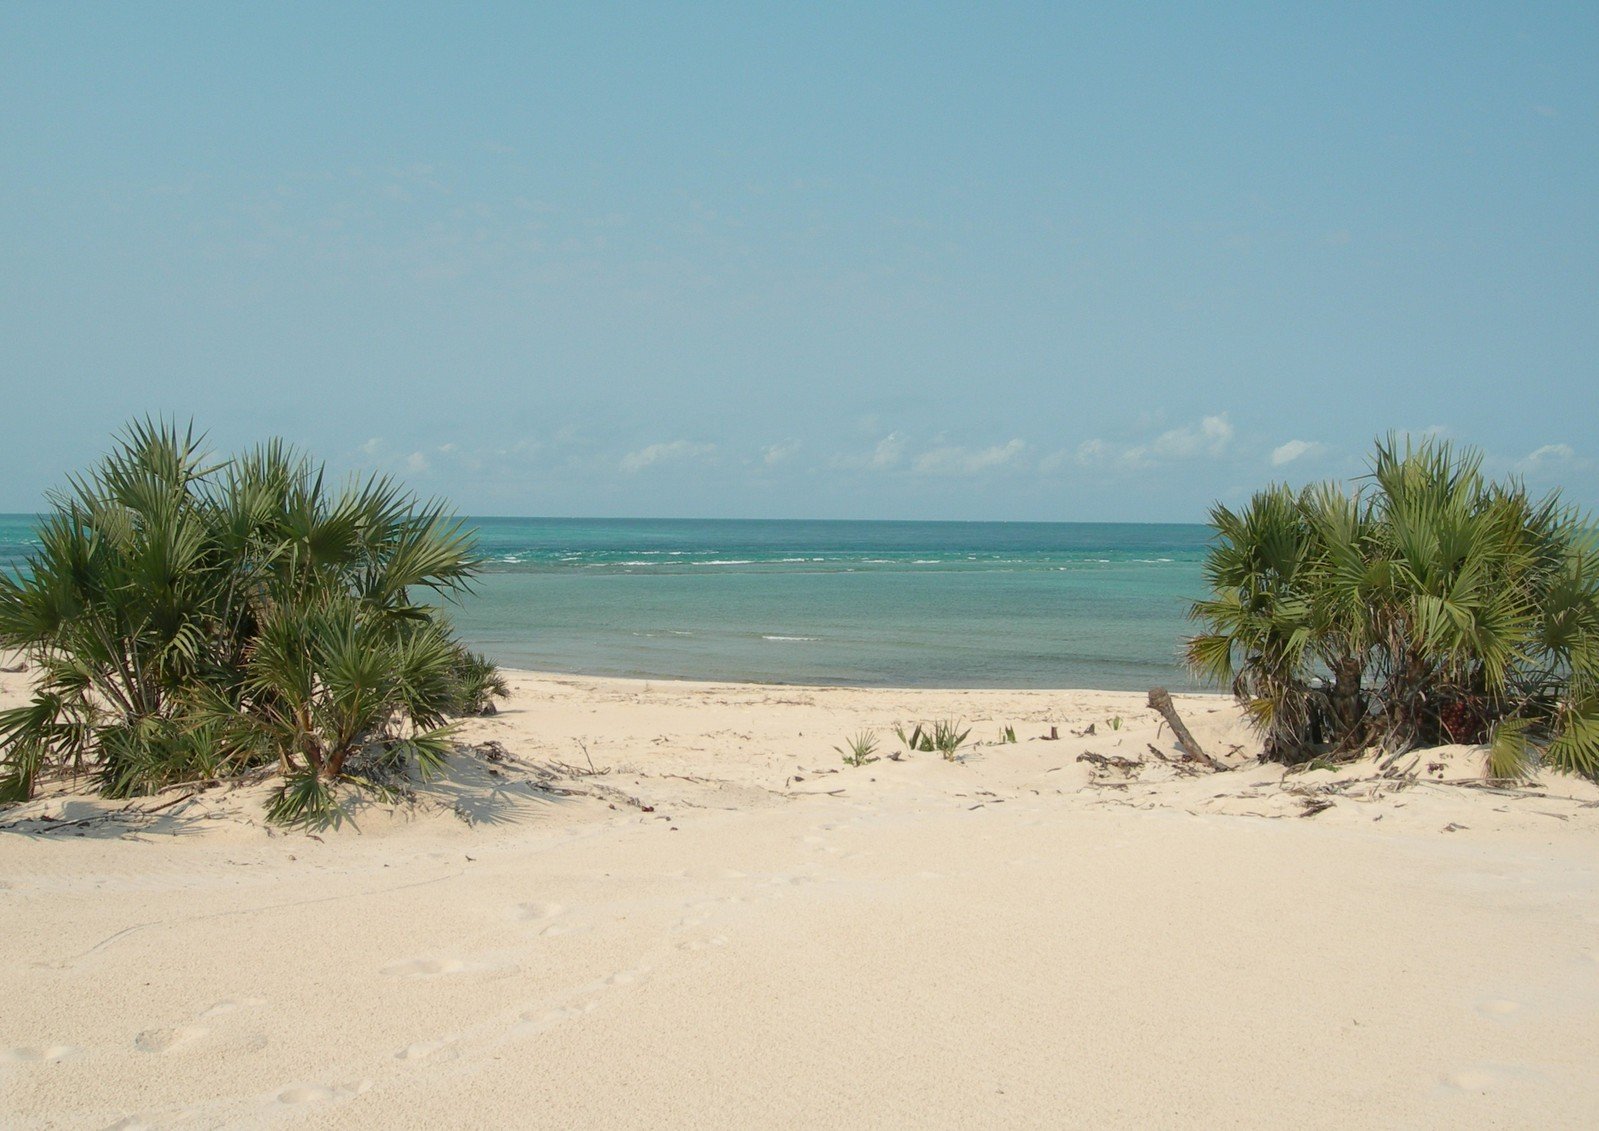 palm trees line the beach and a small body of water